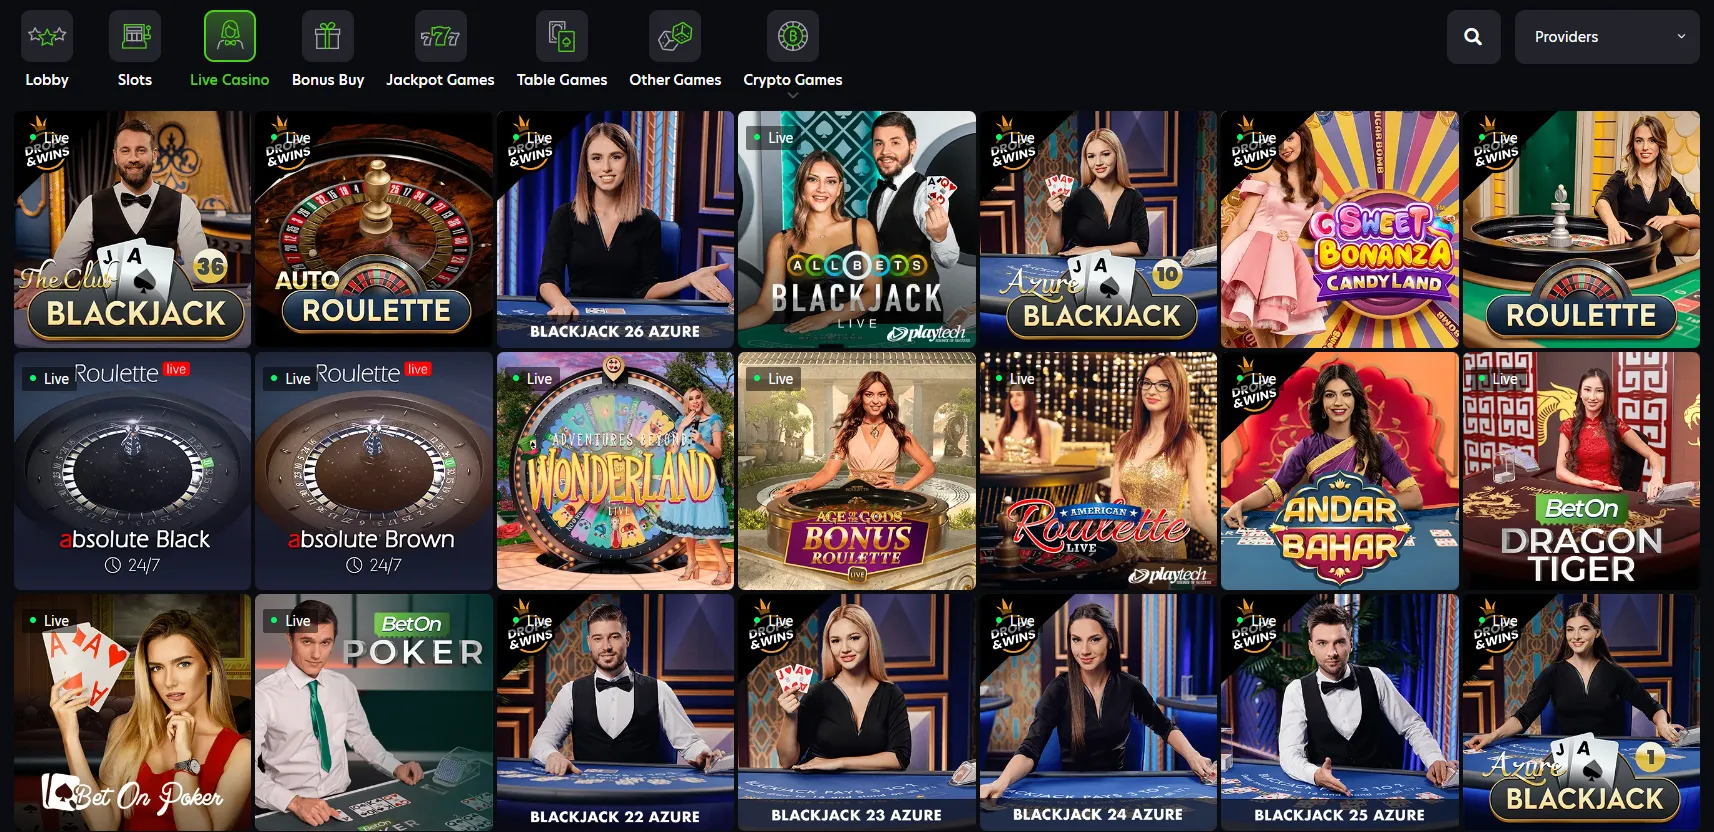 3,000+ games portfolio by Neospin is able to cover the gaming preferences of most casino players